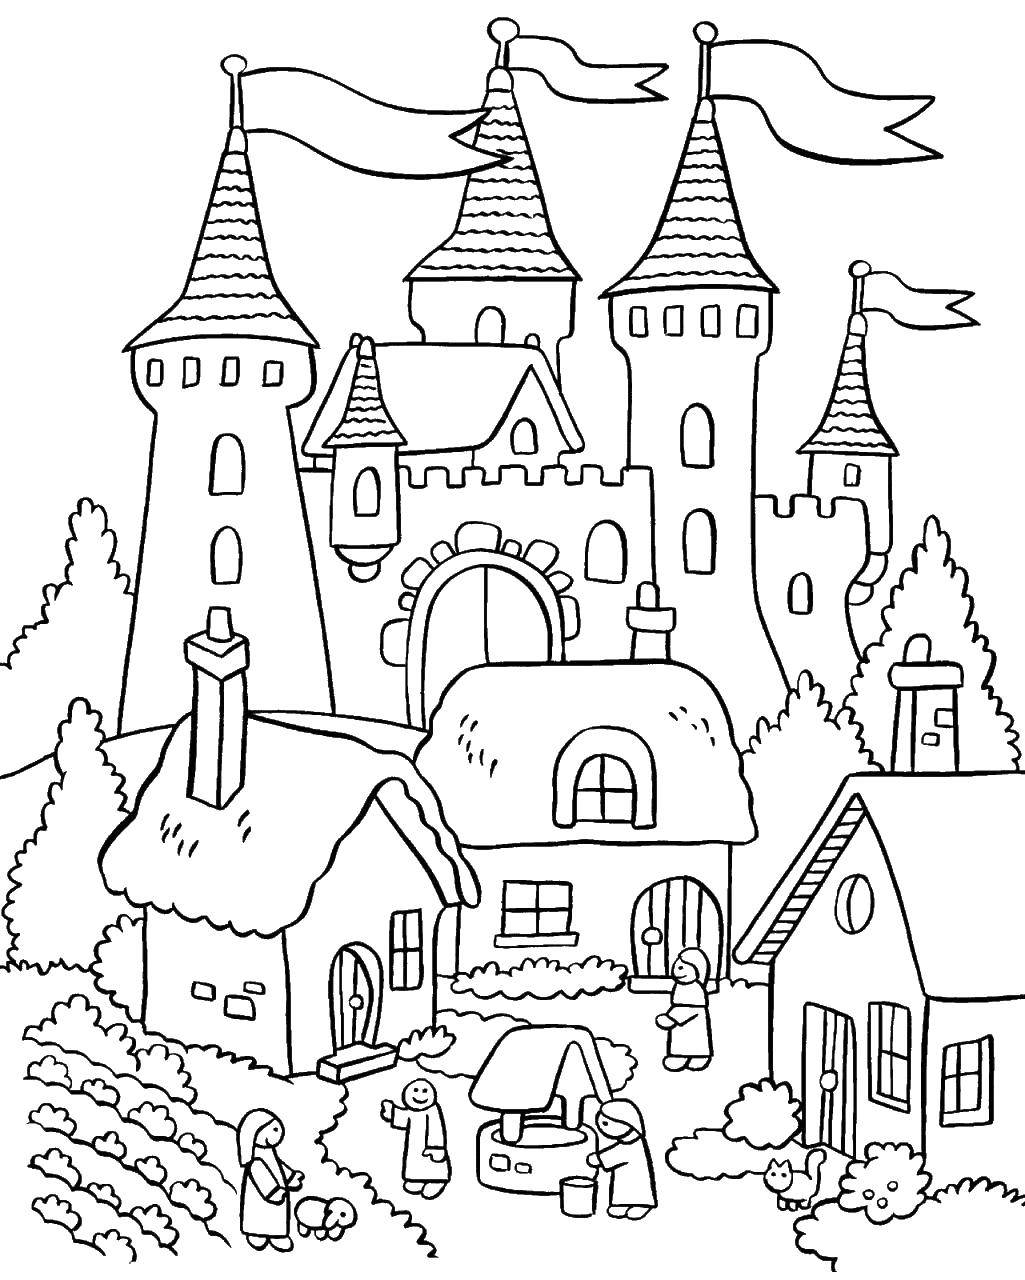 Coloring Home and castle. Category Coloring house. Tags:  house, castle, well, people.